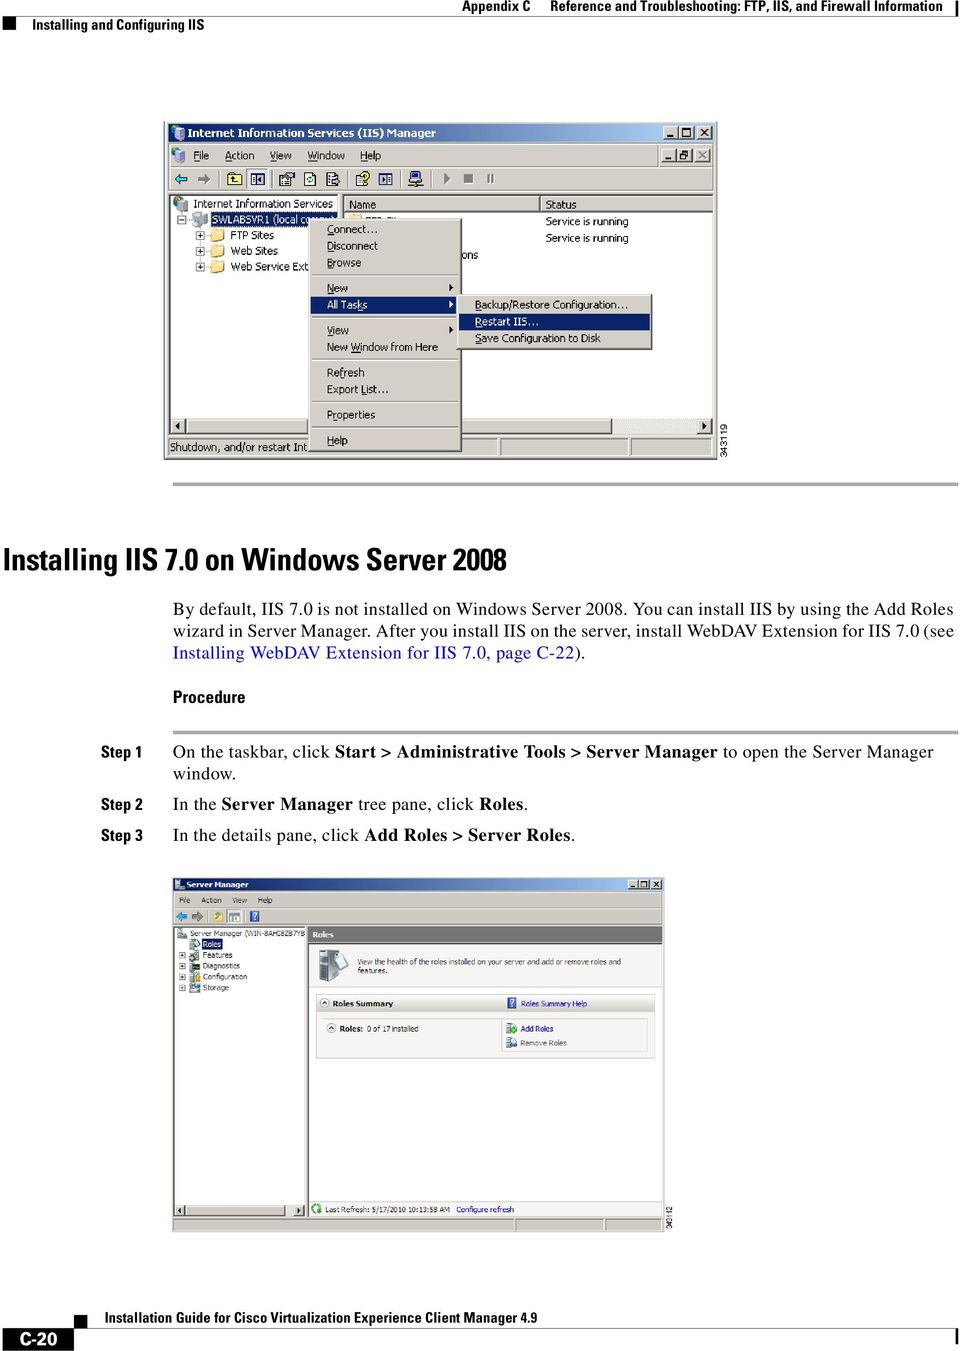 After you install IIS on the server, install WebDAV Extension for IIS 7.0 (see Installing WebDAV Extension for IIS 7.0, page C-22).